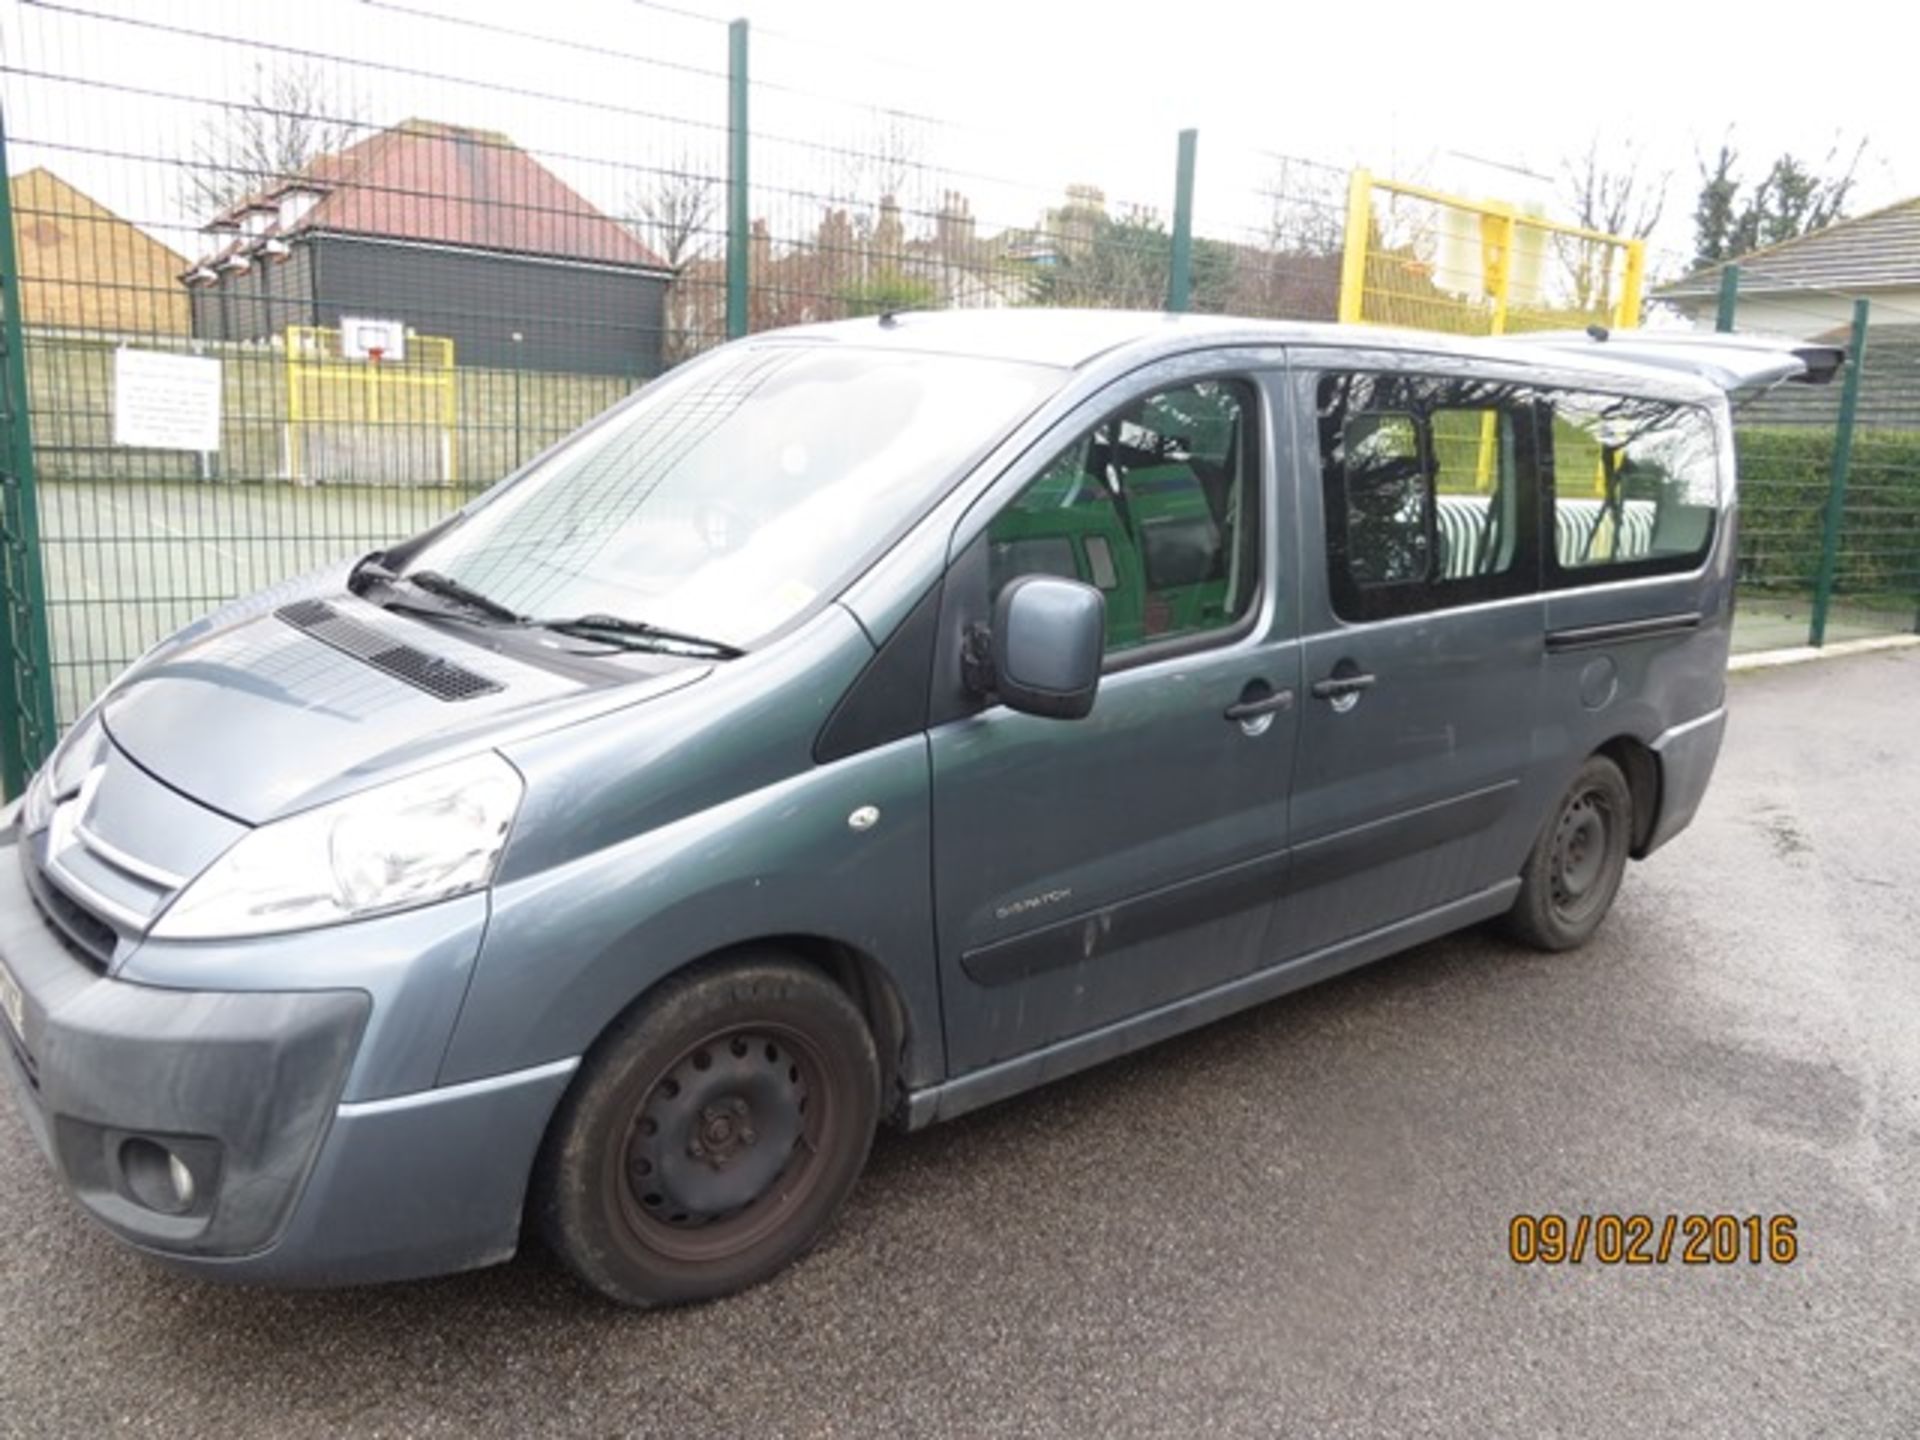 Citroen Dispatch 6 seater minibus C/W wheel chair lift and access YJ58 XNT mileage 150,445km Vehicle - Image 3 of 6